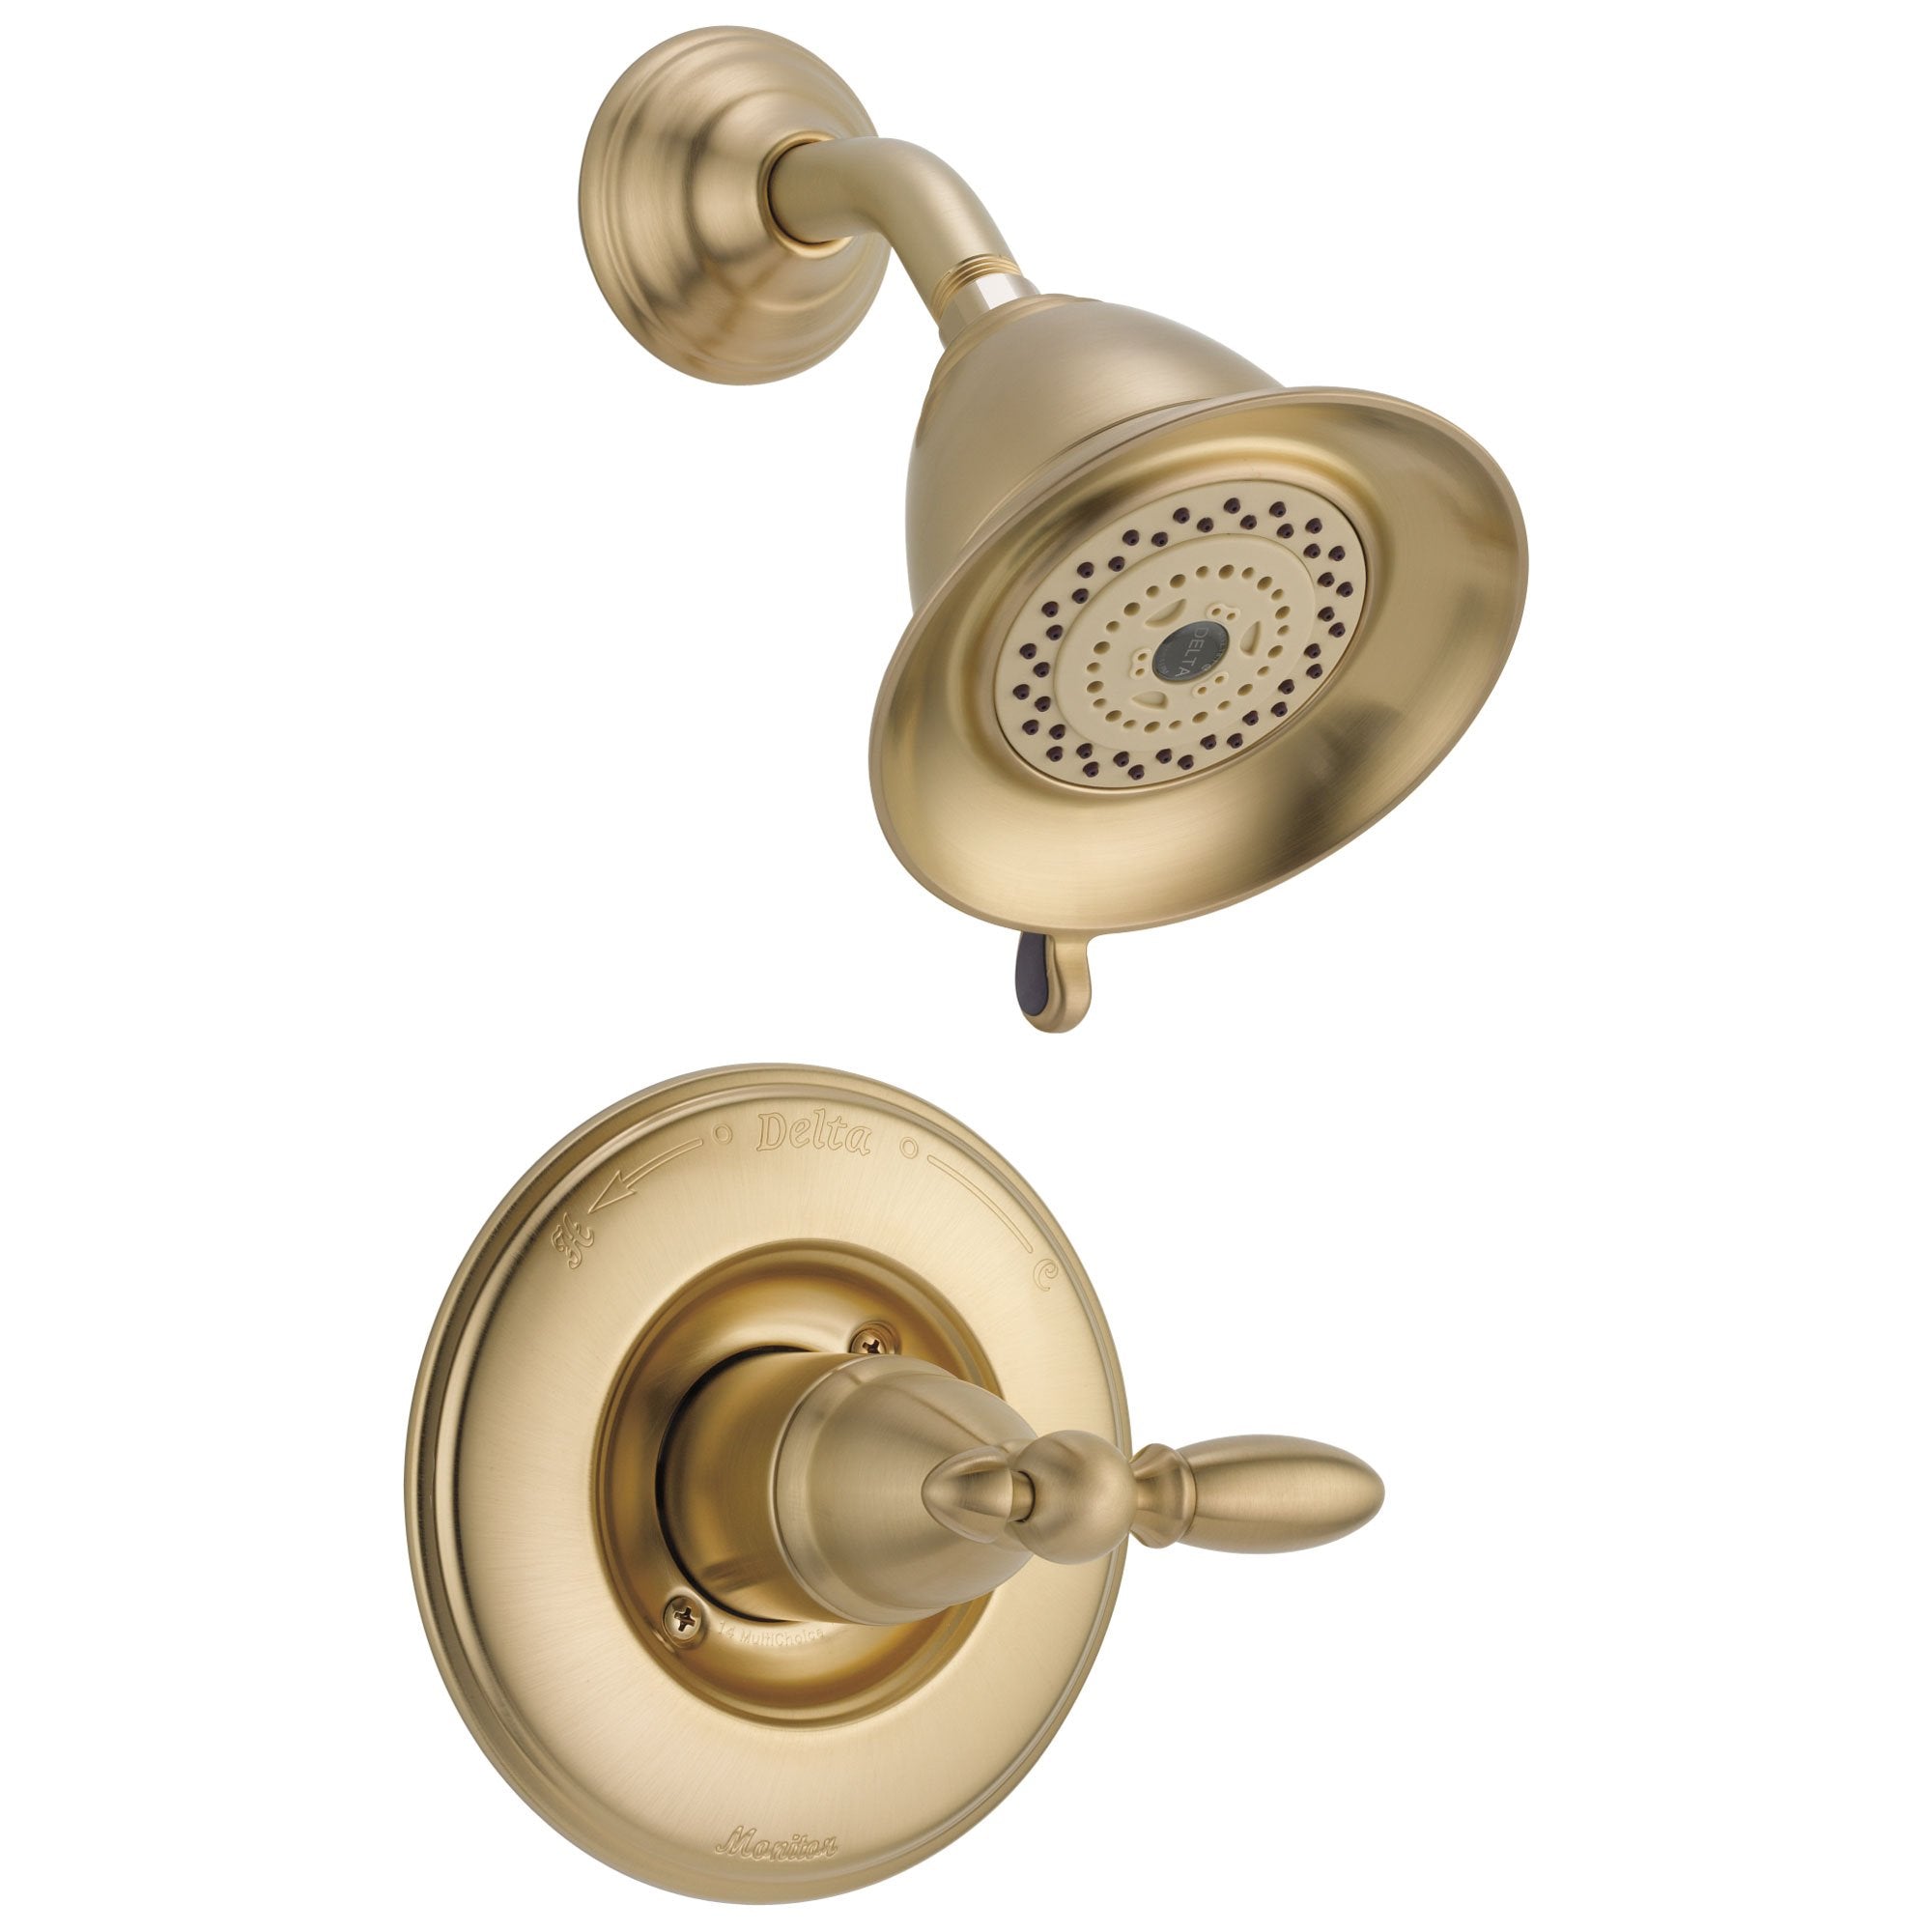 Delta Victorian Collection Champagne Bronze Traditional Monitor 14 Shower Faucet INCLUDES Single Lever Handle and Rough-Valve without Stops D1572V